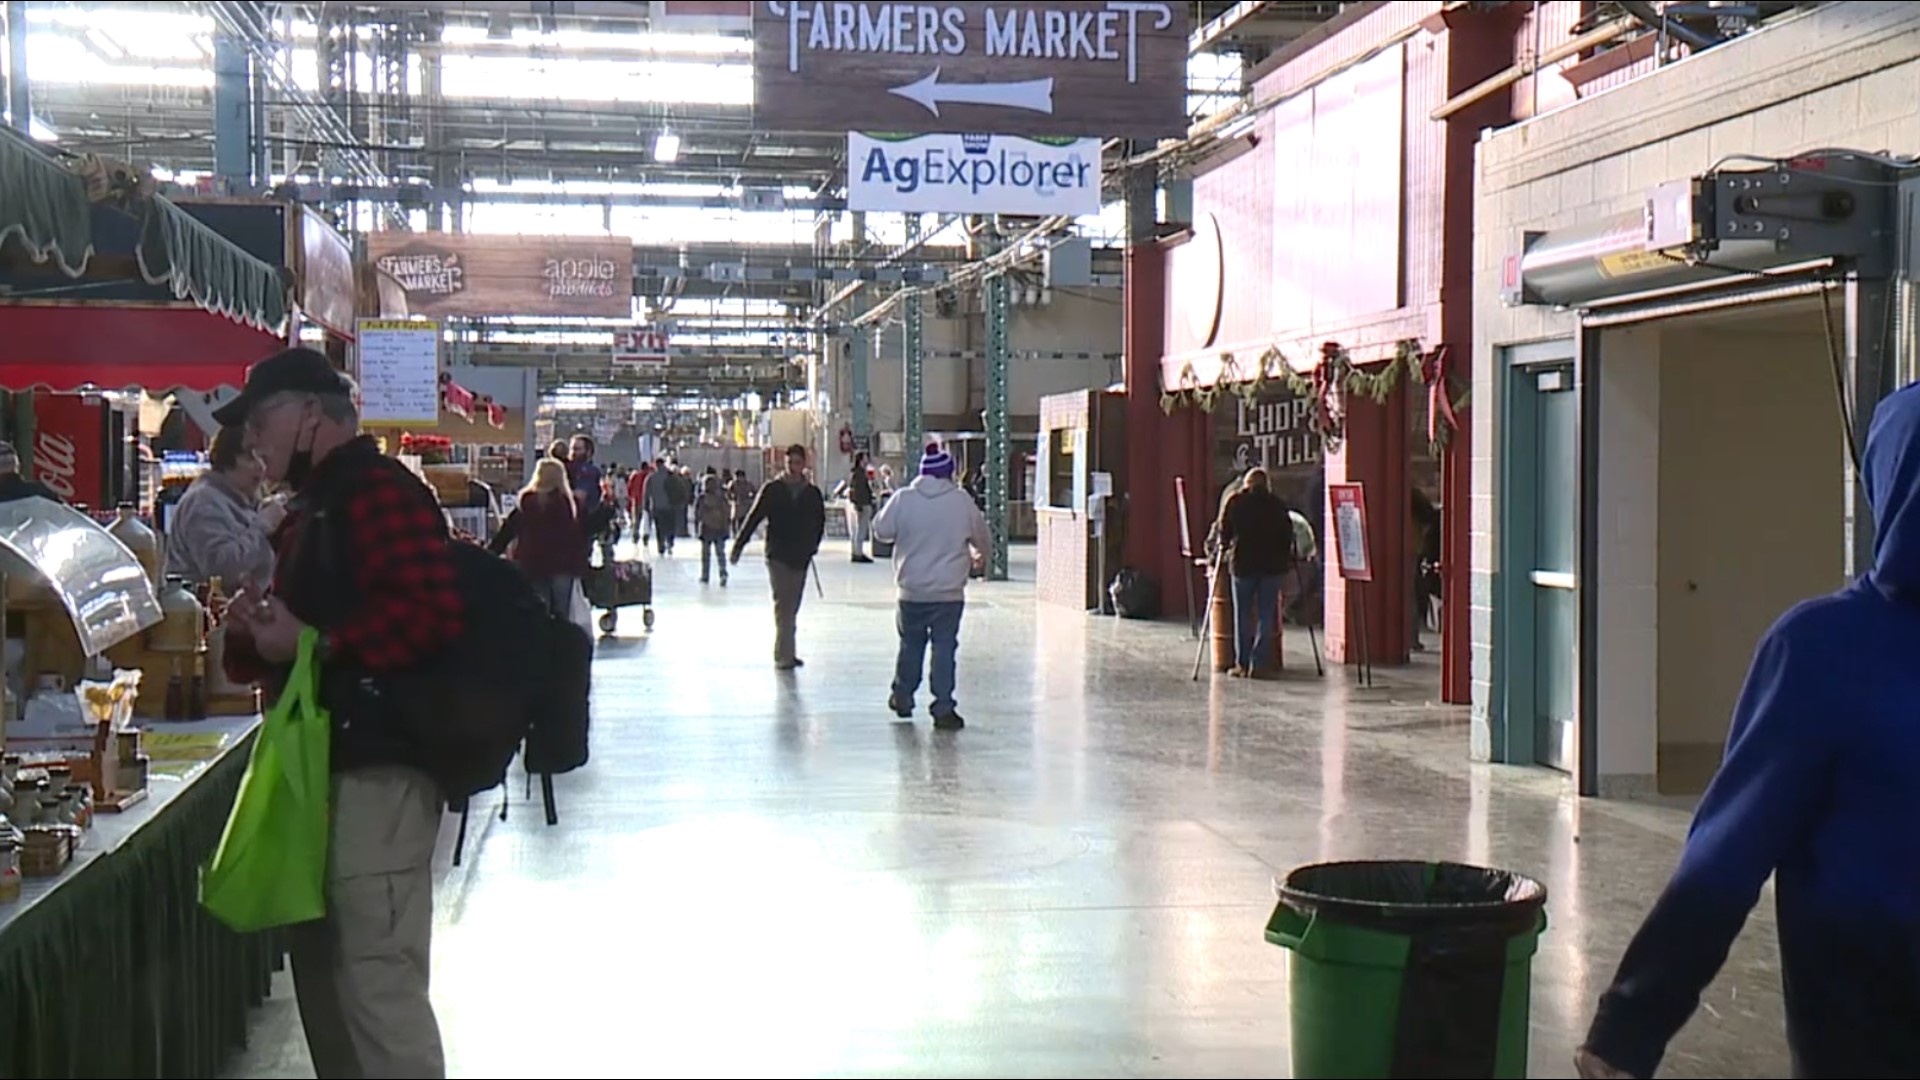 Though the Pennsylvania Farm Show is back in-person this year after a year hiatus due to the COVID-19 pandemic, coronavirus continues to negatively affect vendors.